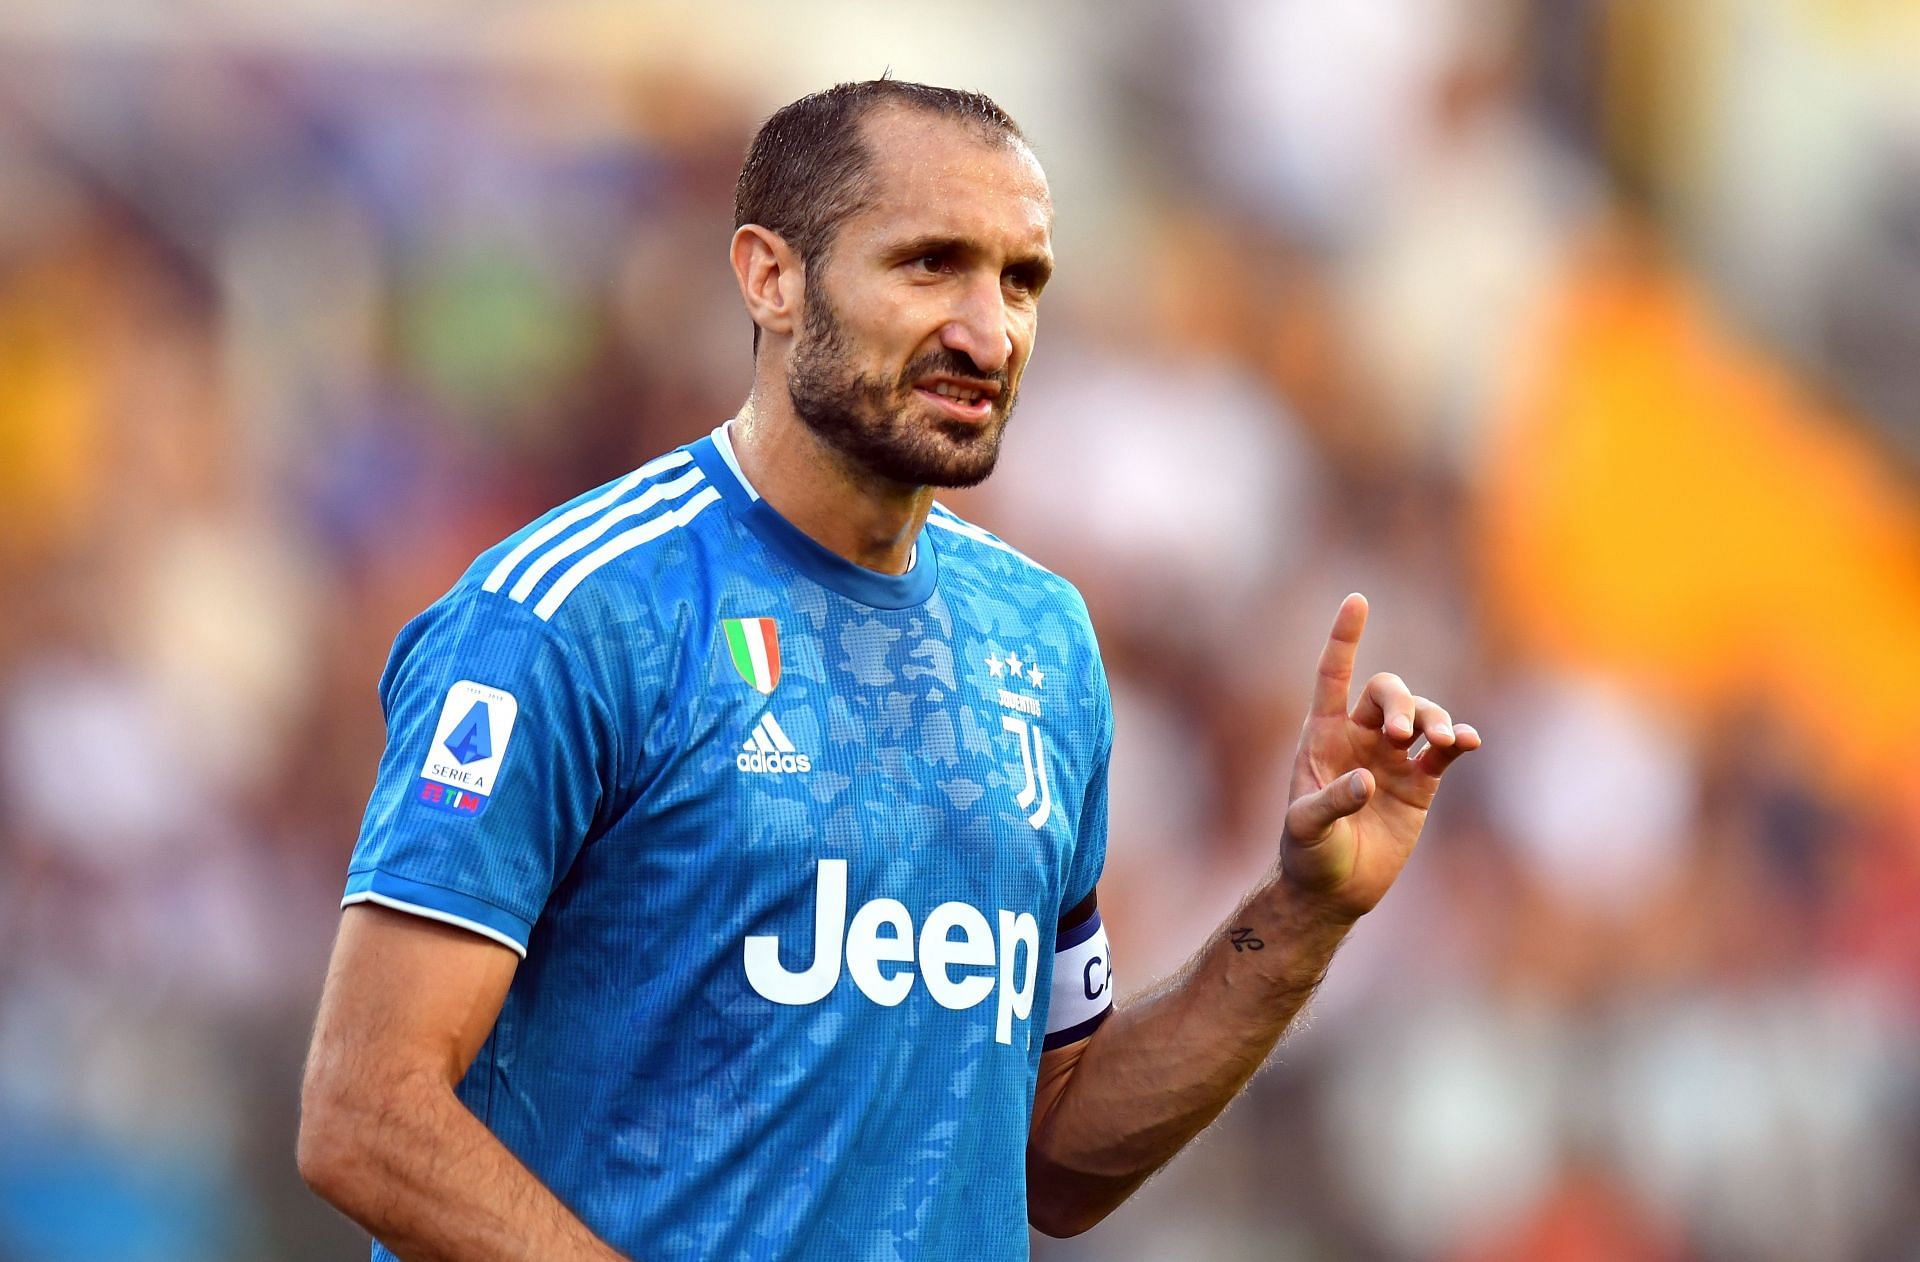 Giorgio Chiellini is still going strong for club and country.